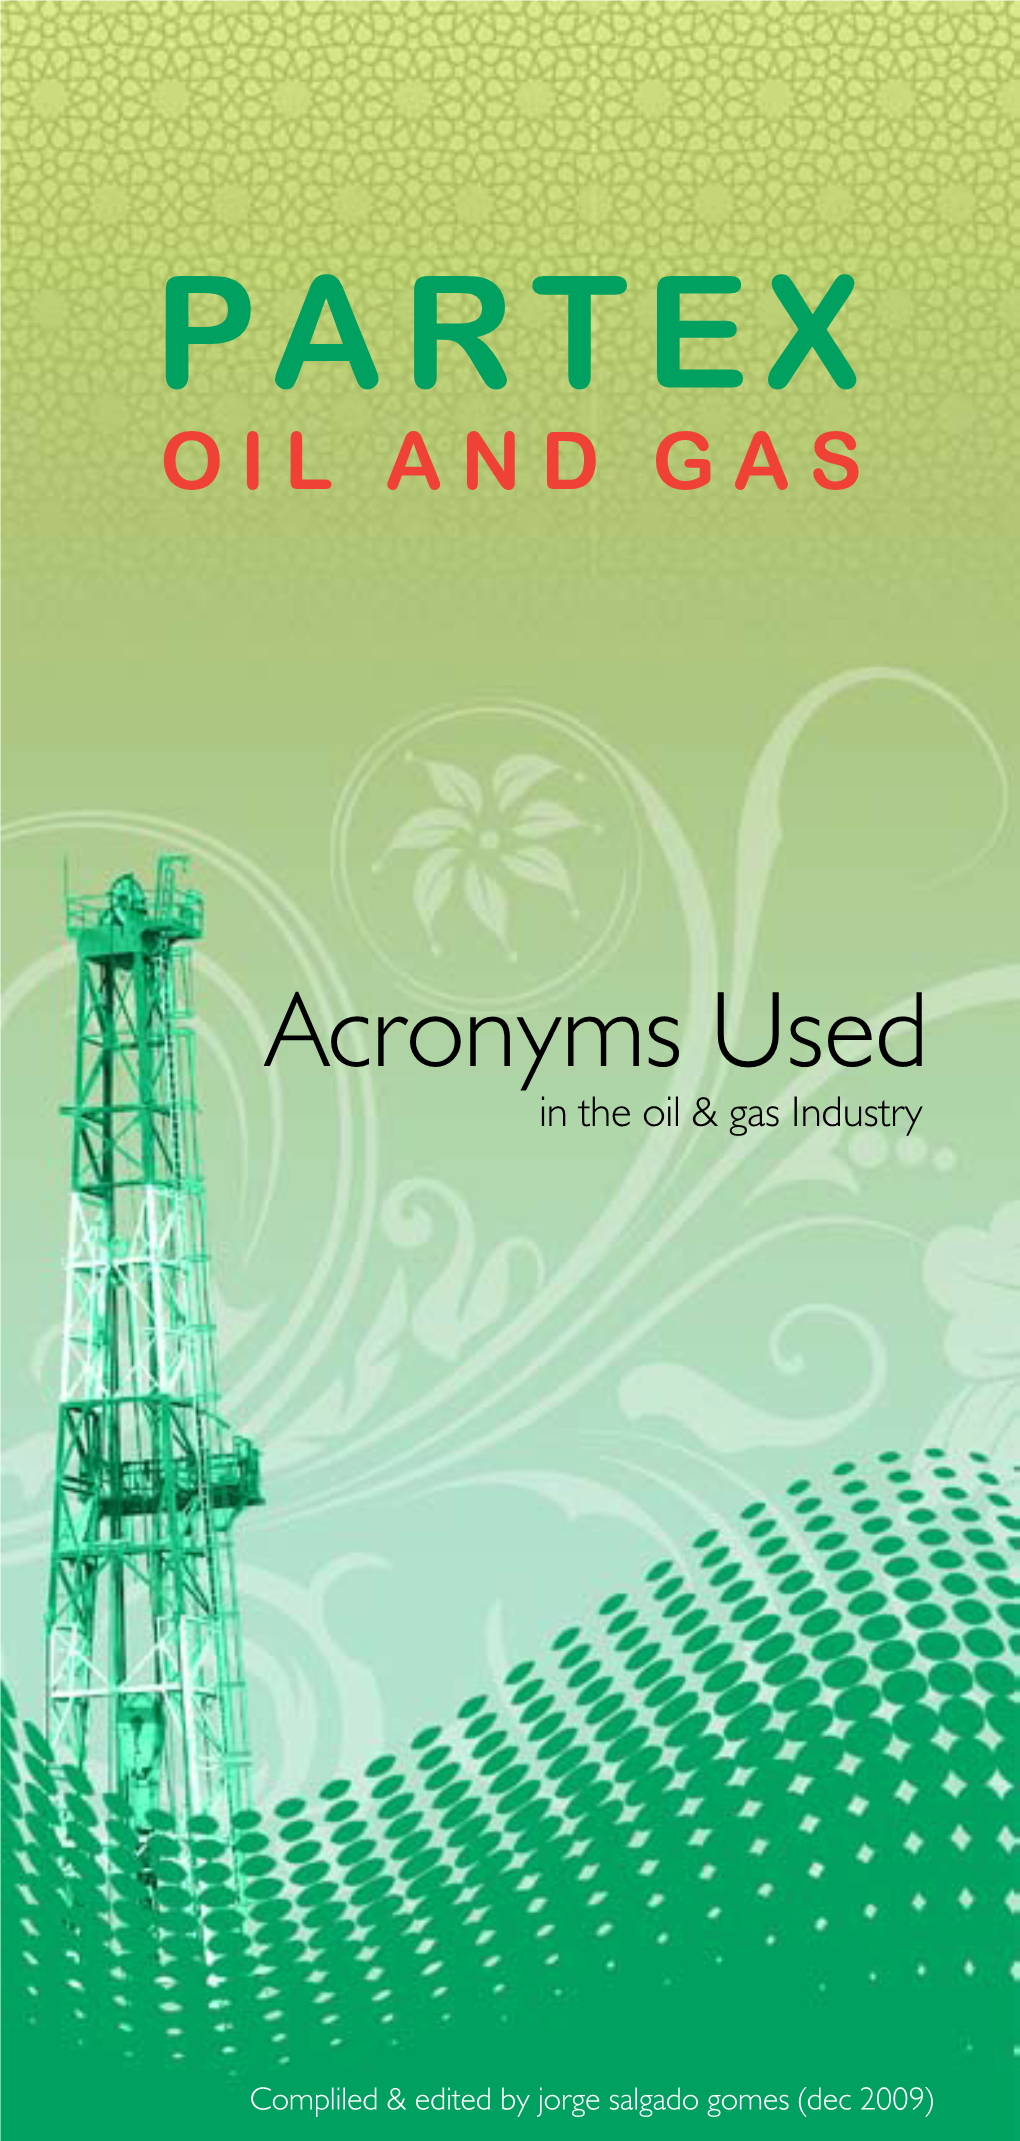 Acronyms Used in the Oil Industry